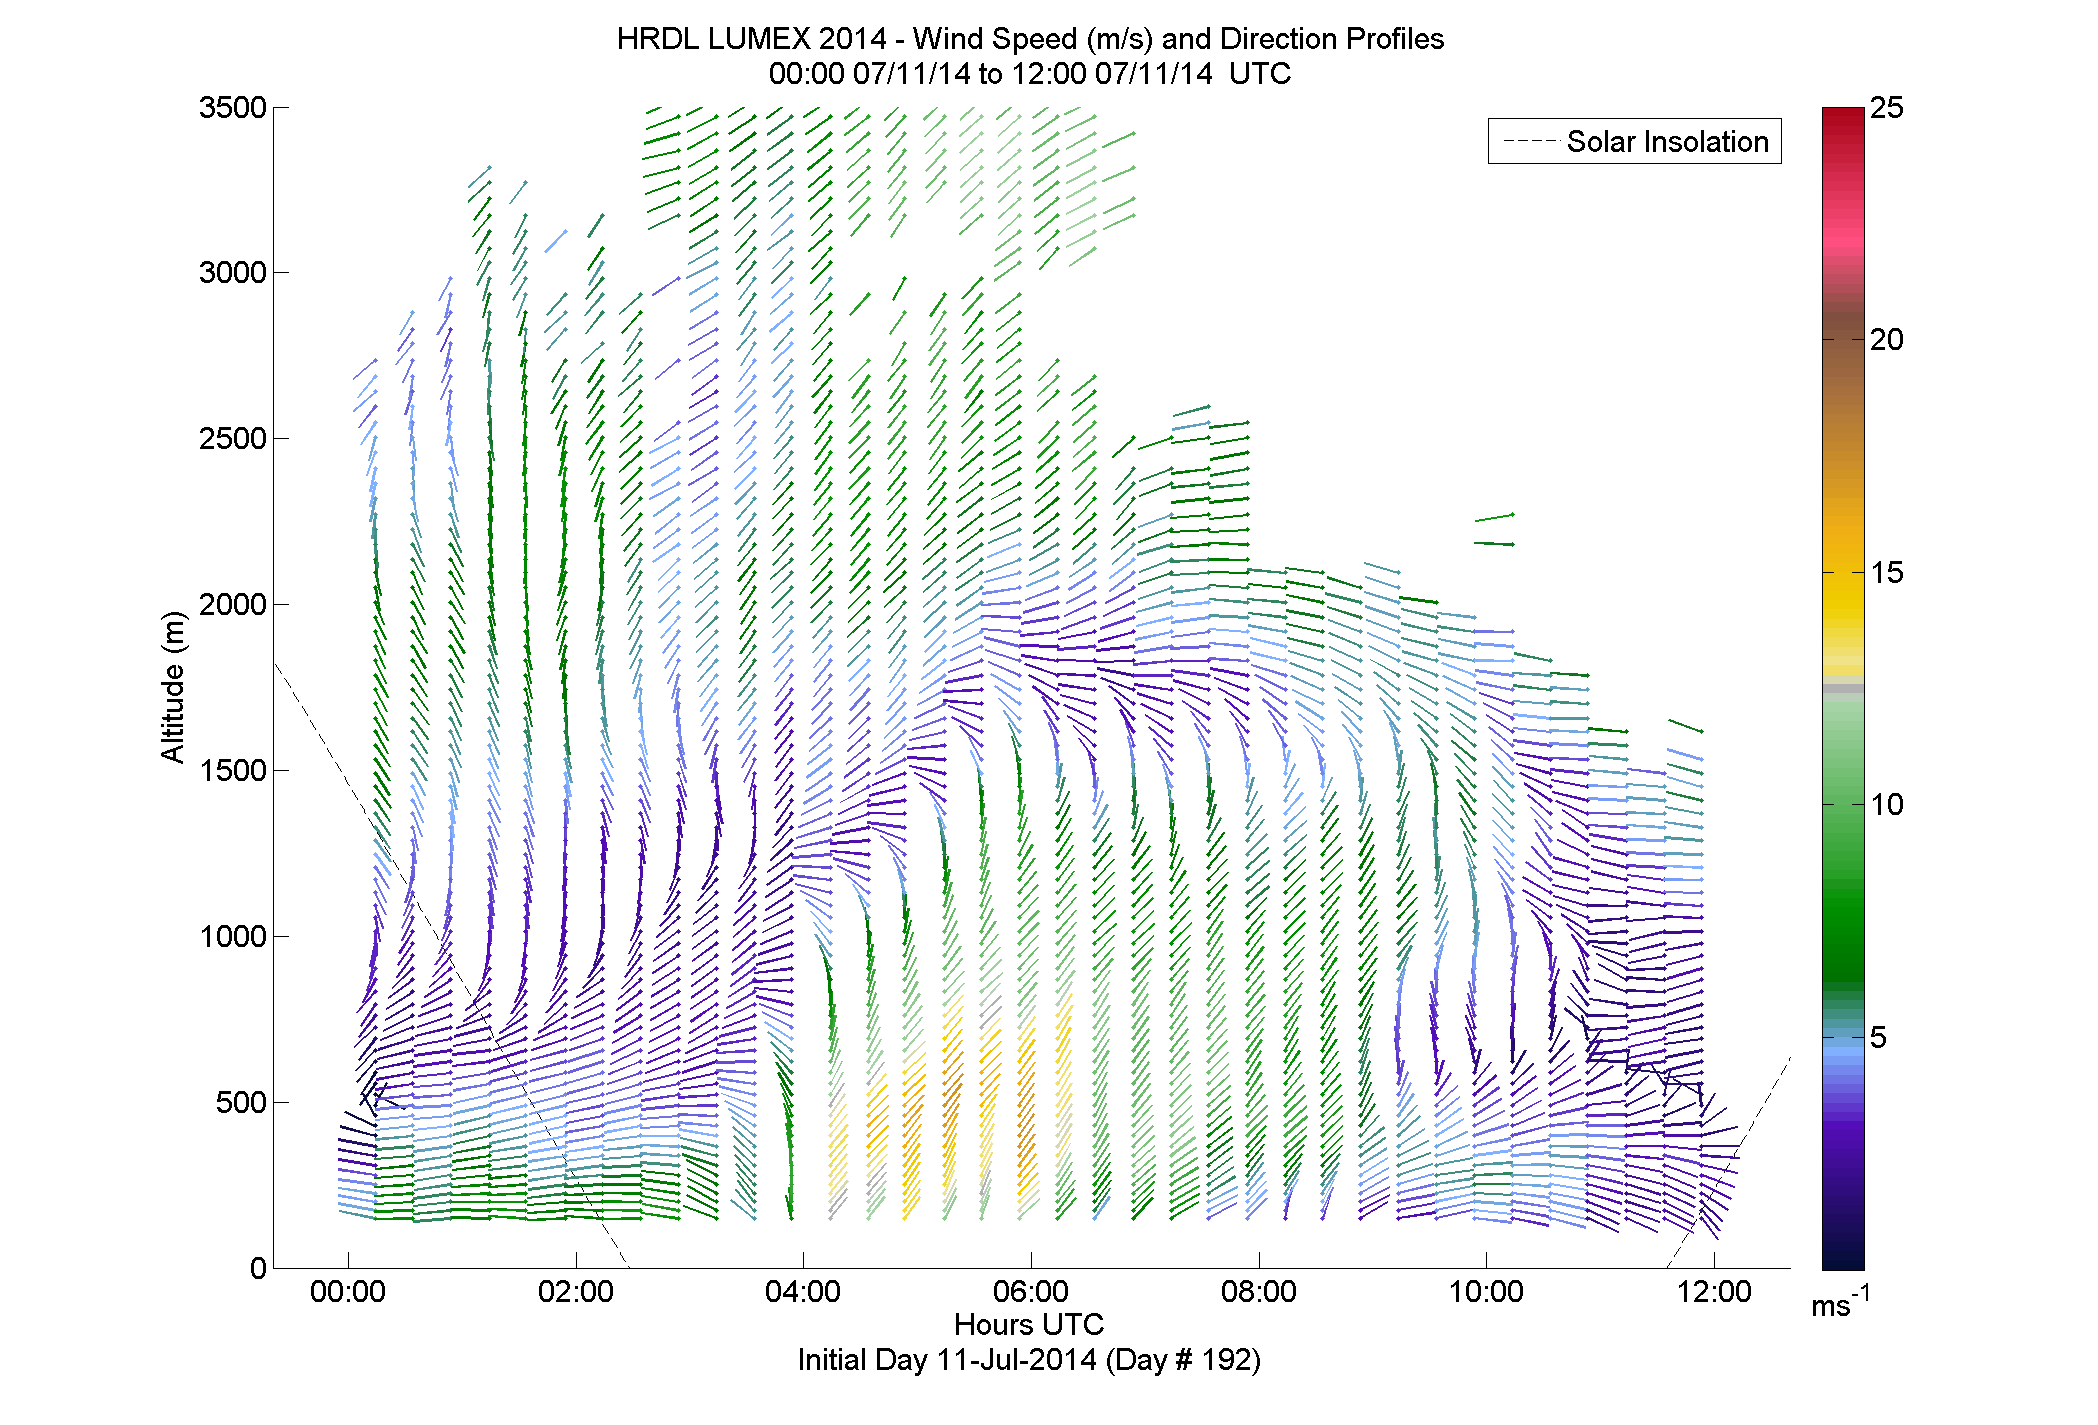 HRDL speed and direction profile - July 11 am